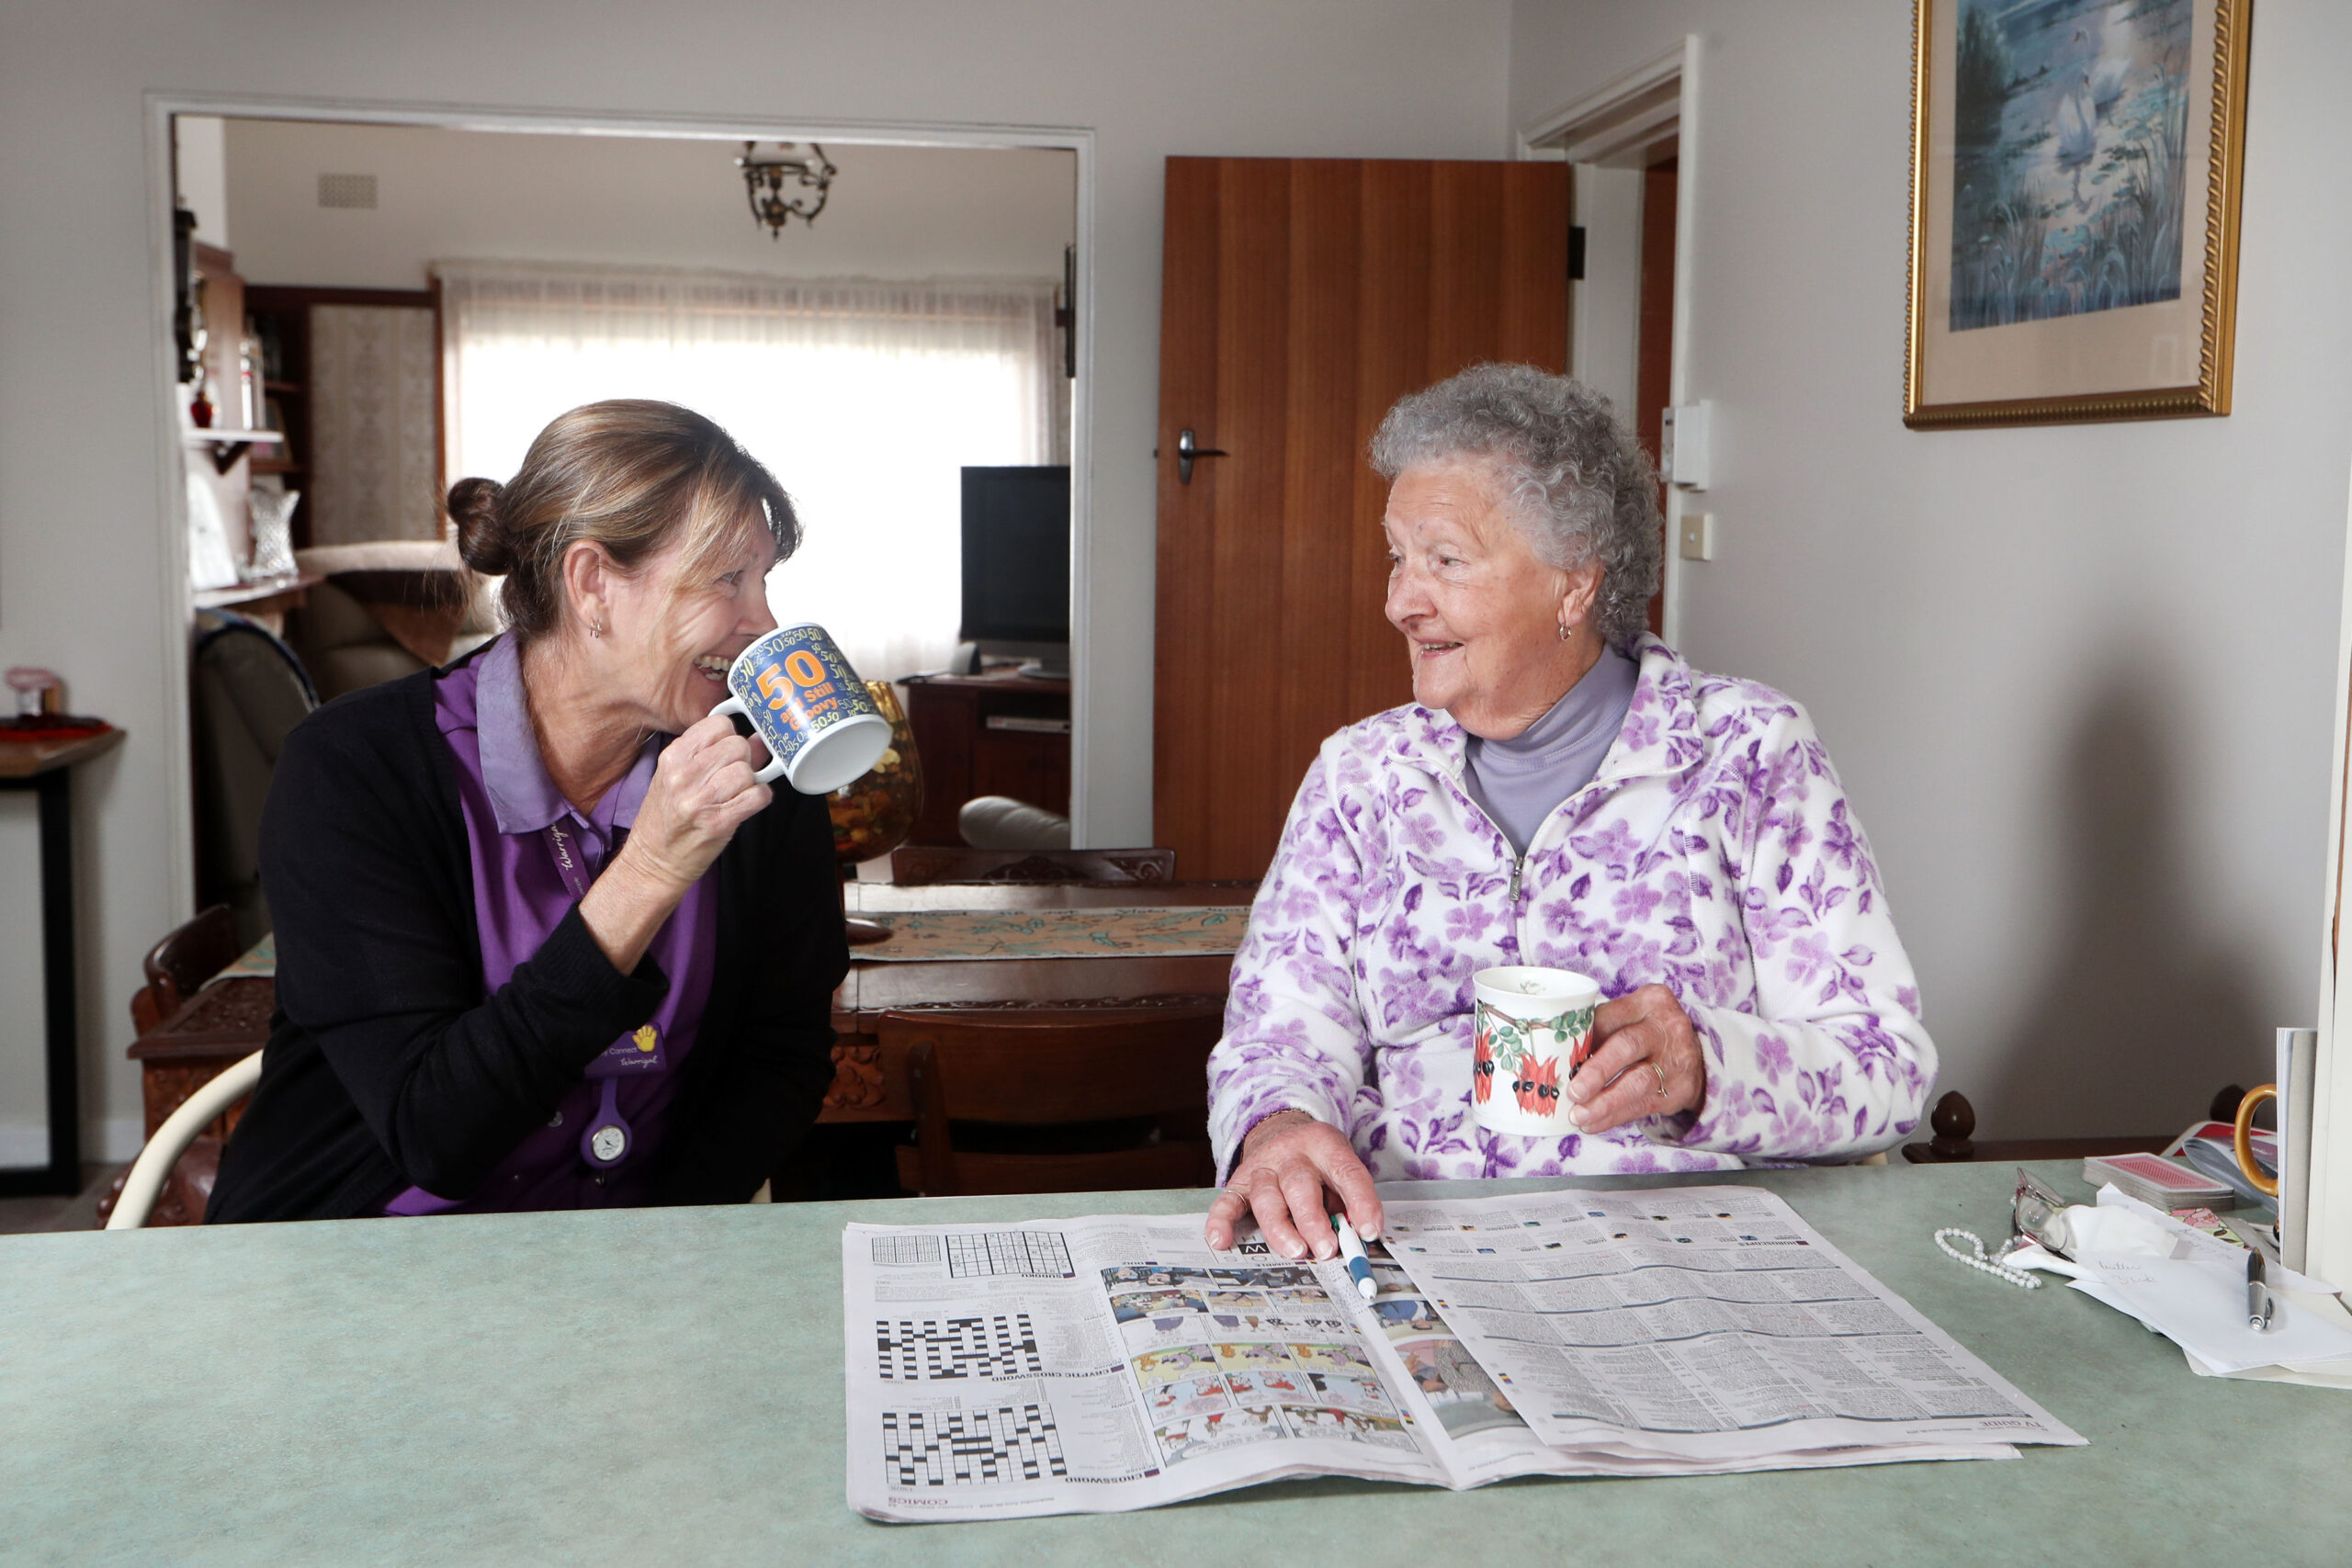 Home services staff sharing a friendly tea time with customer, fostering a warm and personal connection while providing care and companionship through Warrigal's home services.